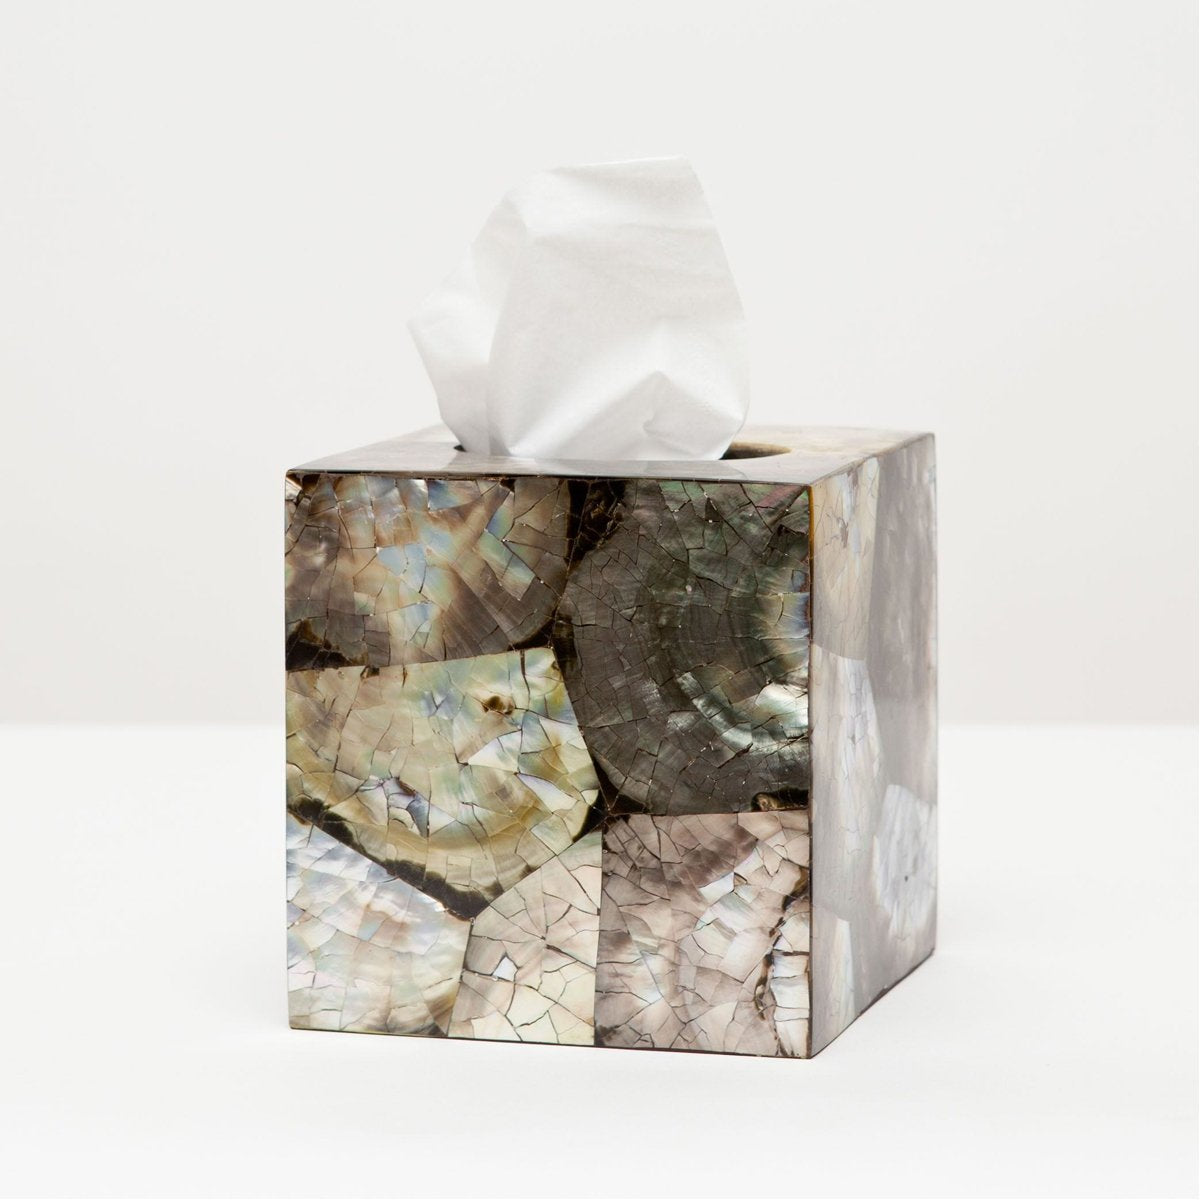 Pigeon and Poodle Moritz Tissue Box, Square